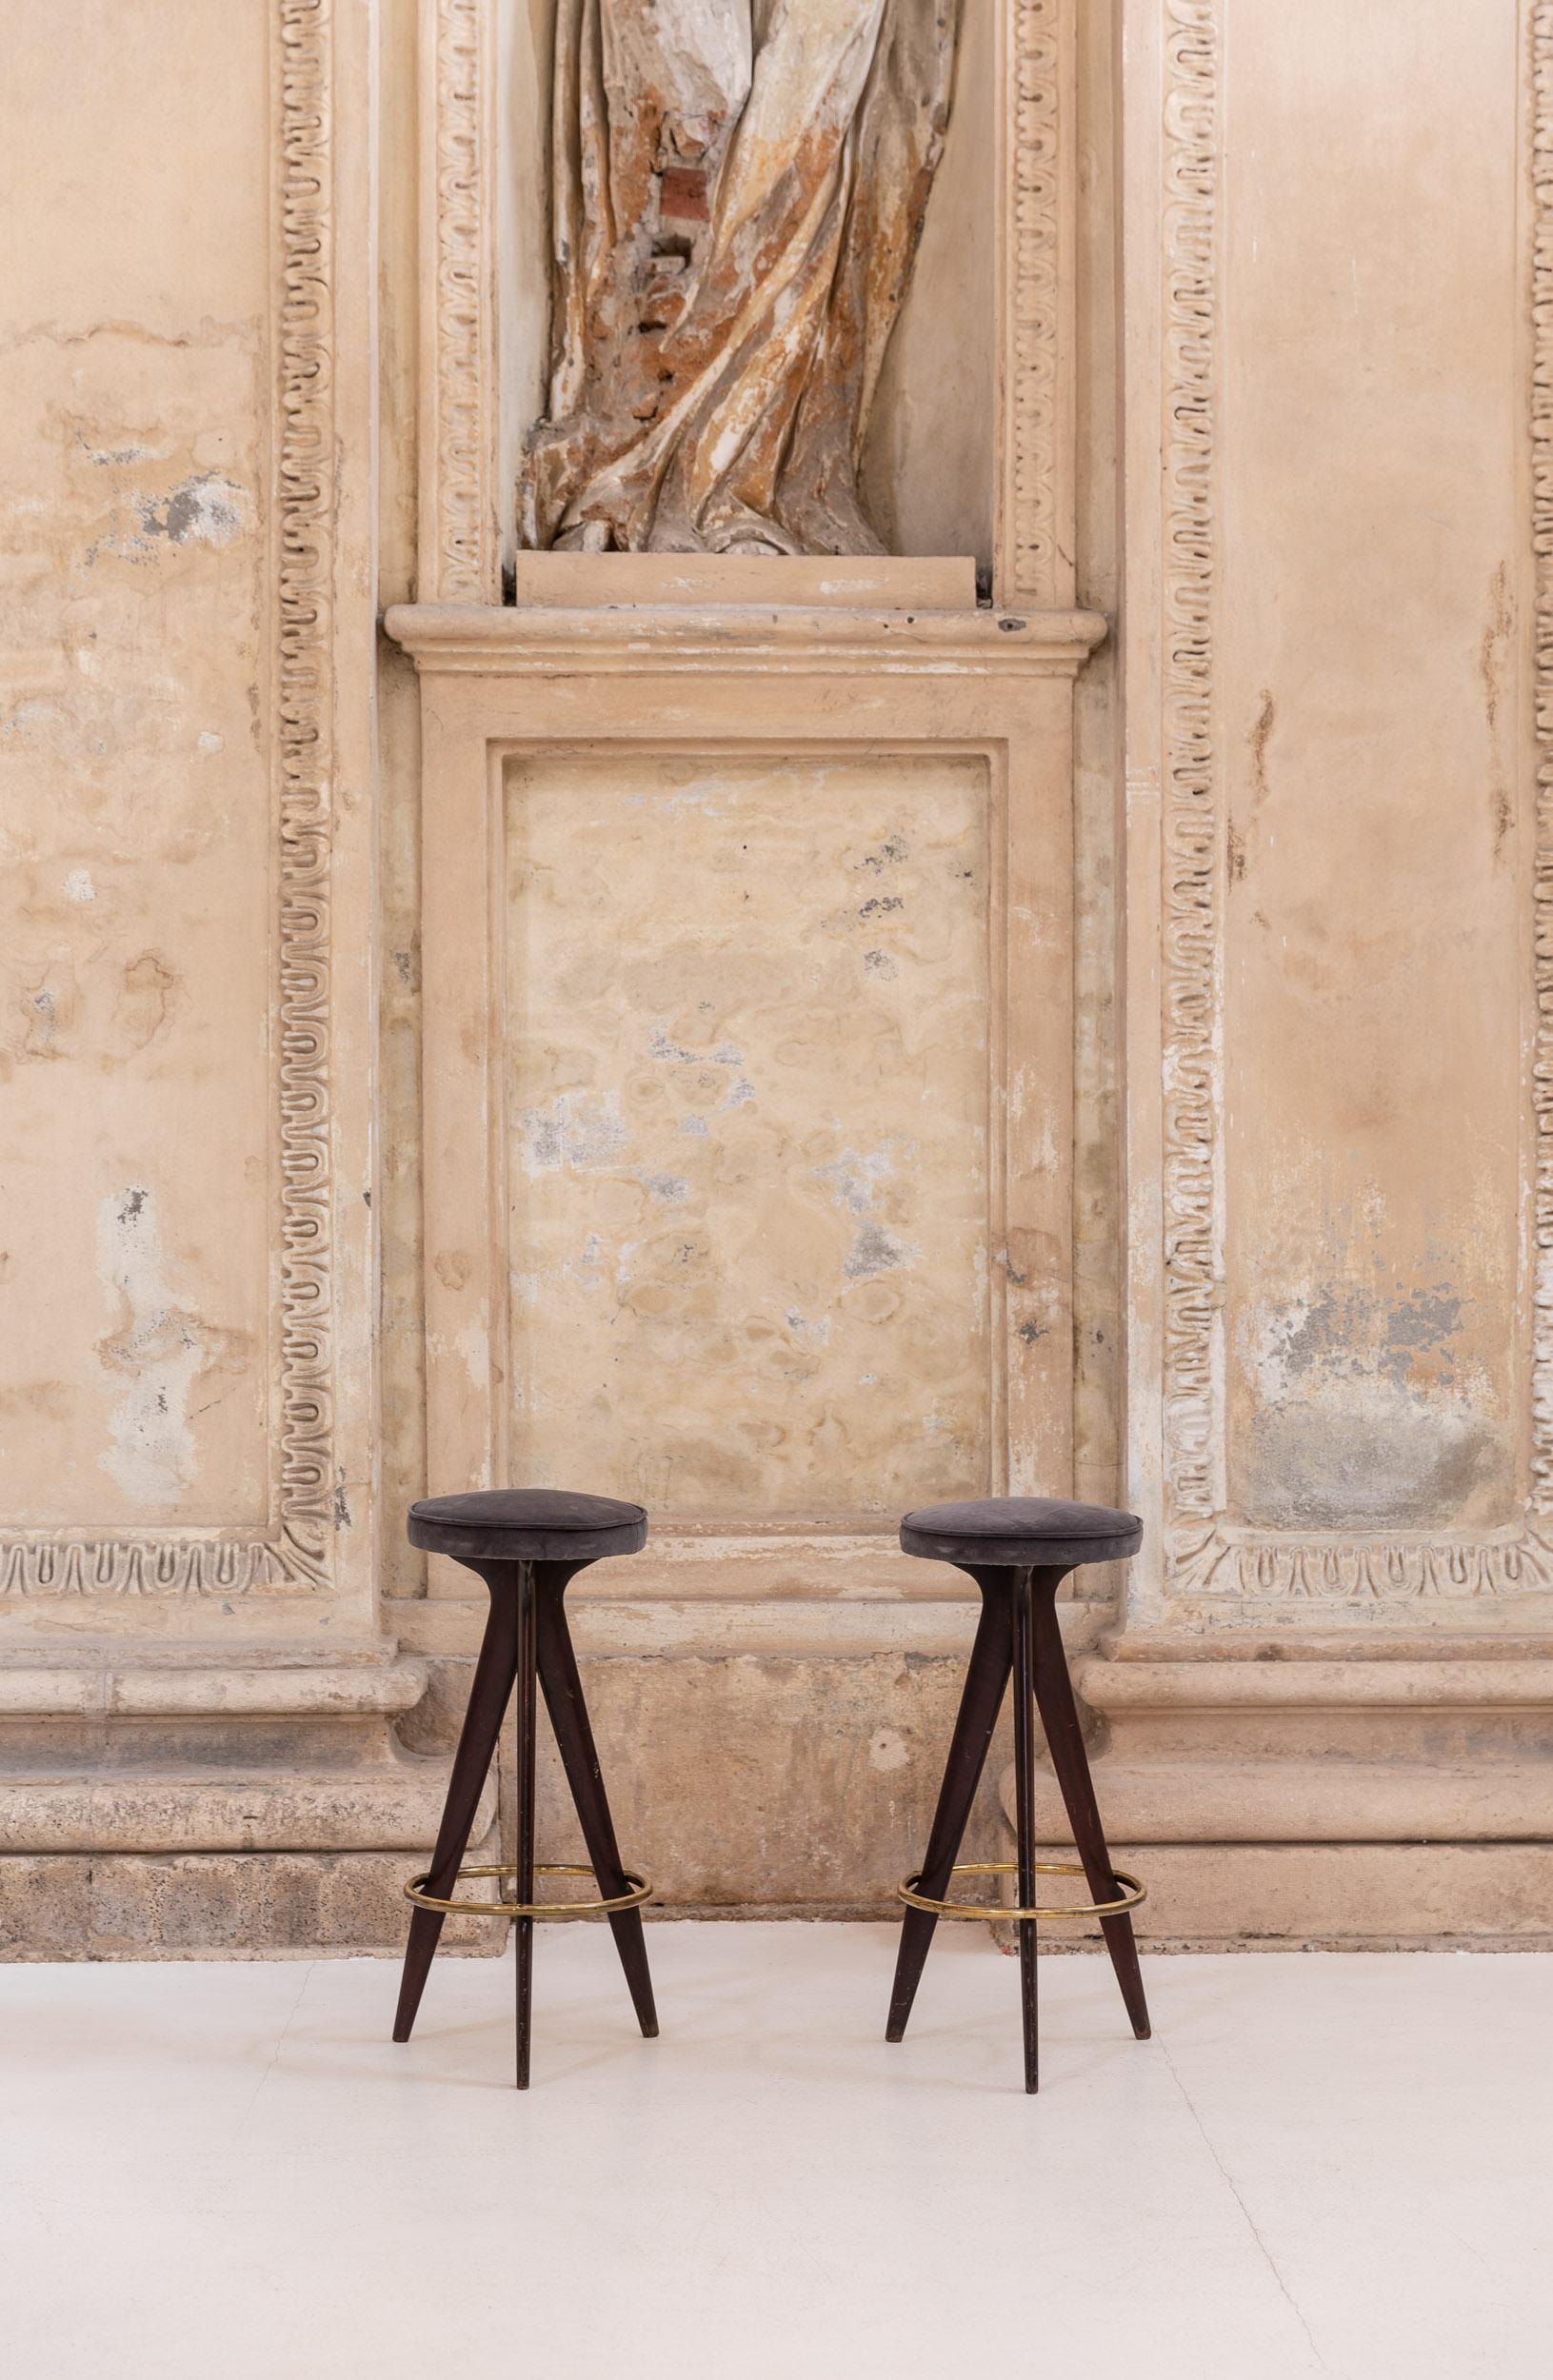 Pair of stool with walnut legs, velvet and brass accents, attributed to Ico Parisi.
The frame of the stool is executed in brown wood, the round seat are upholstered in grey velvet, the ring that connects the three legs is made in golden